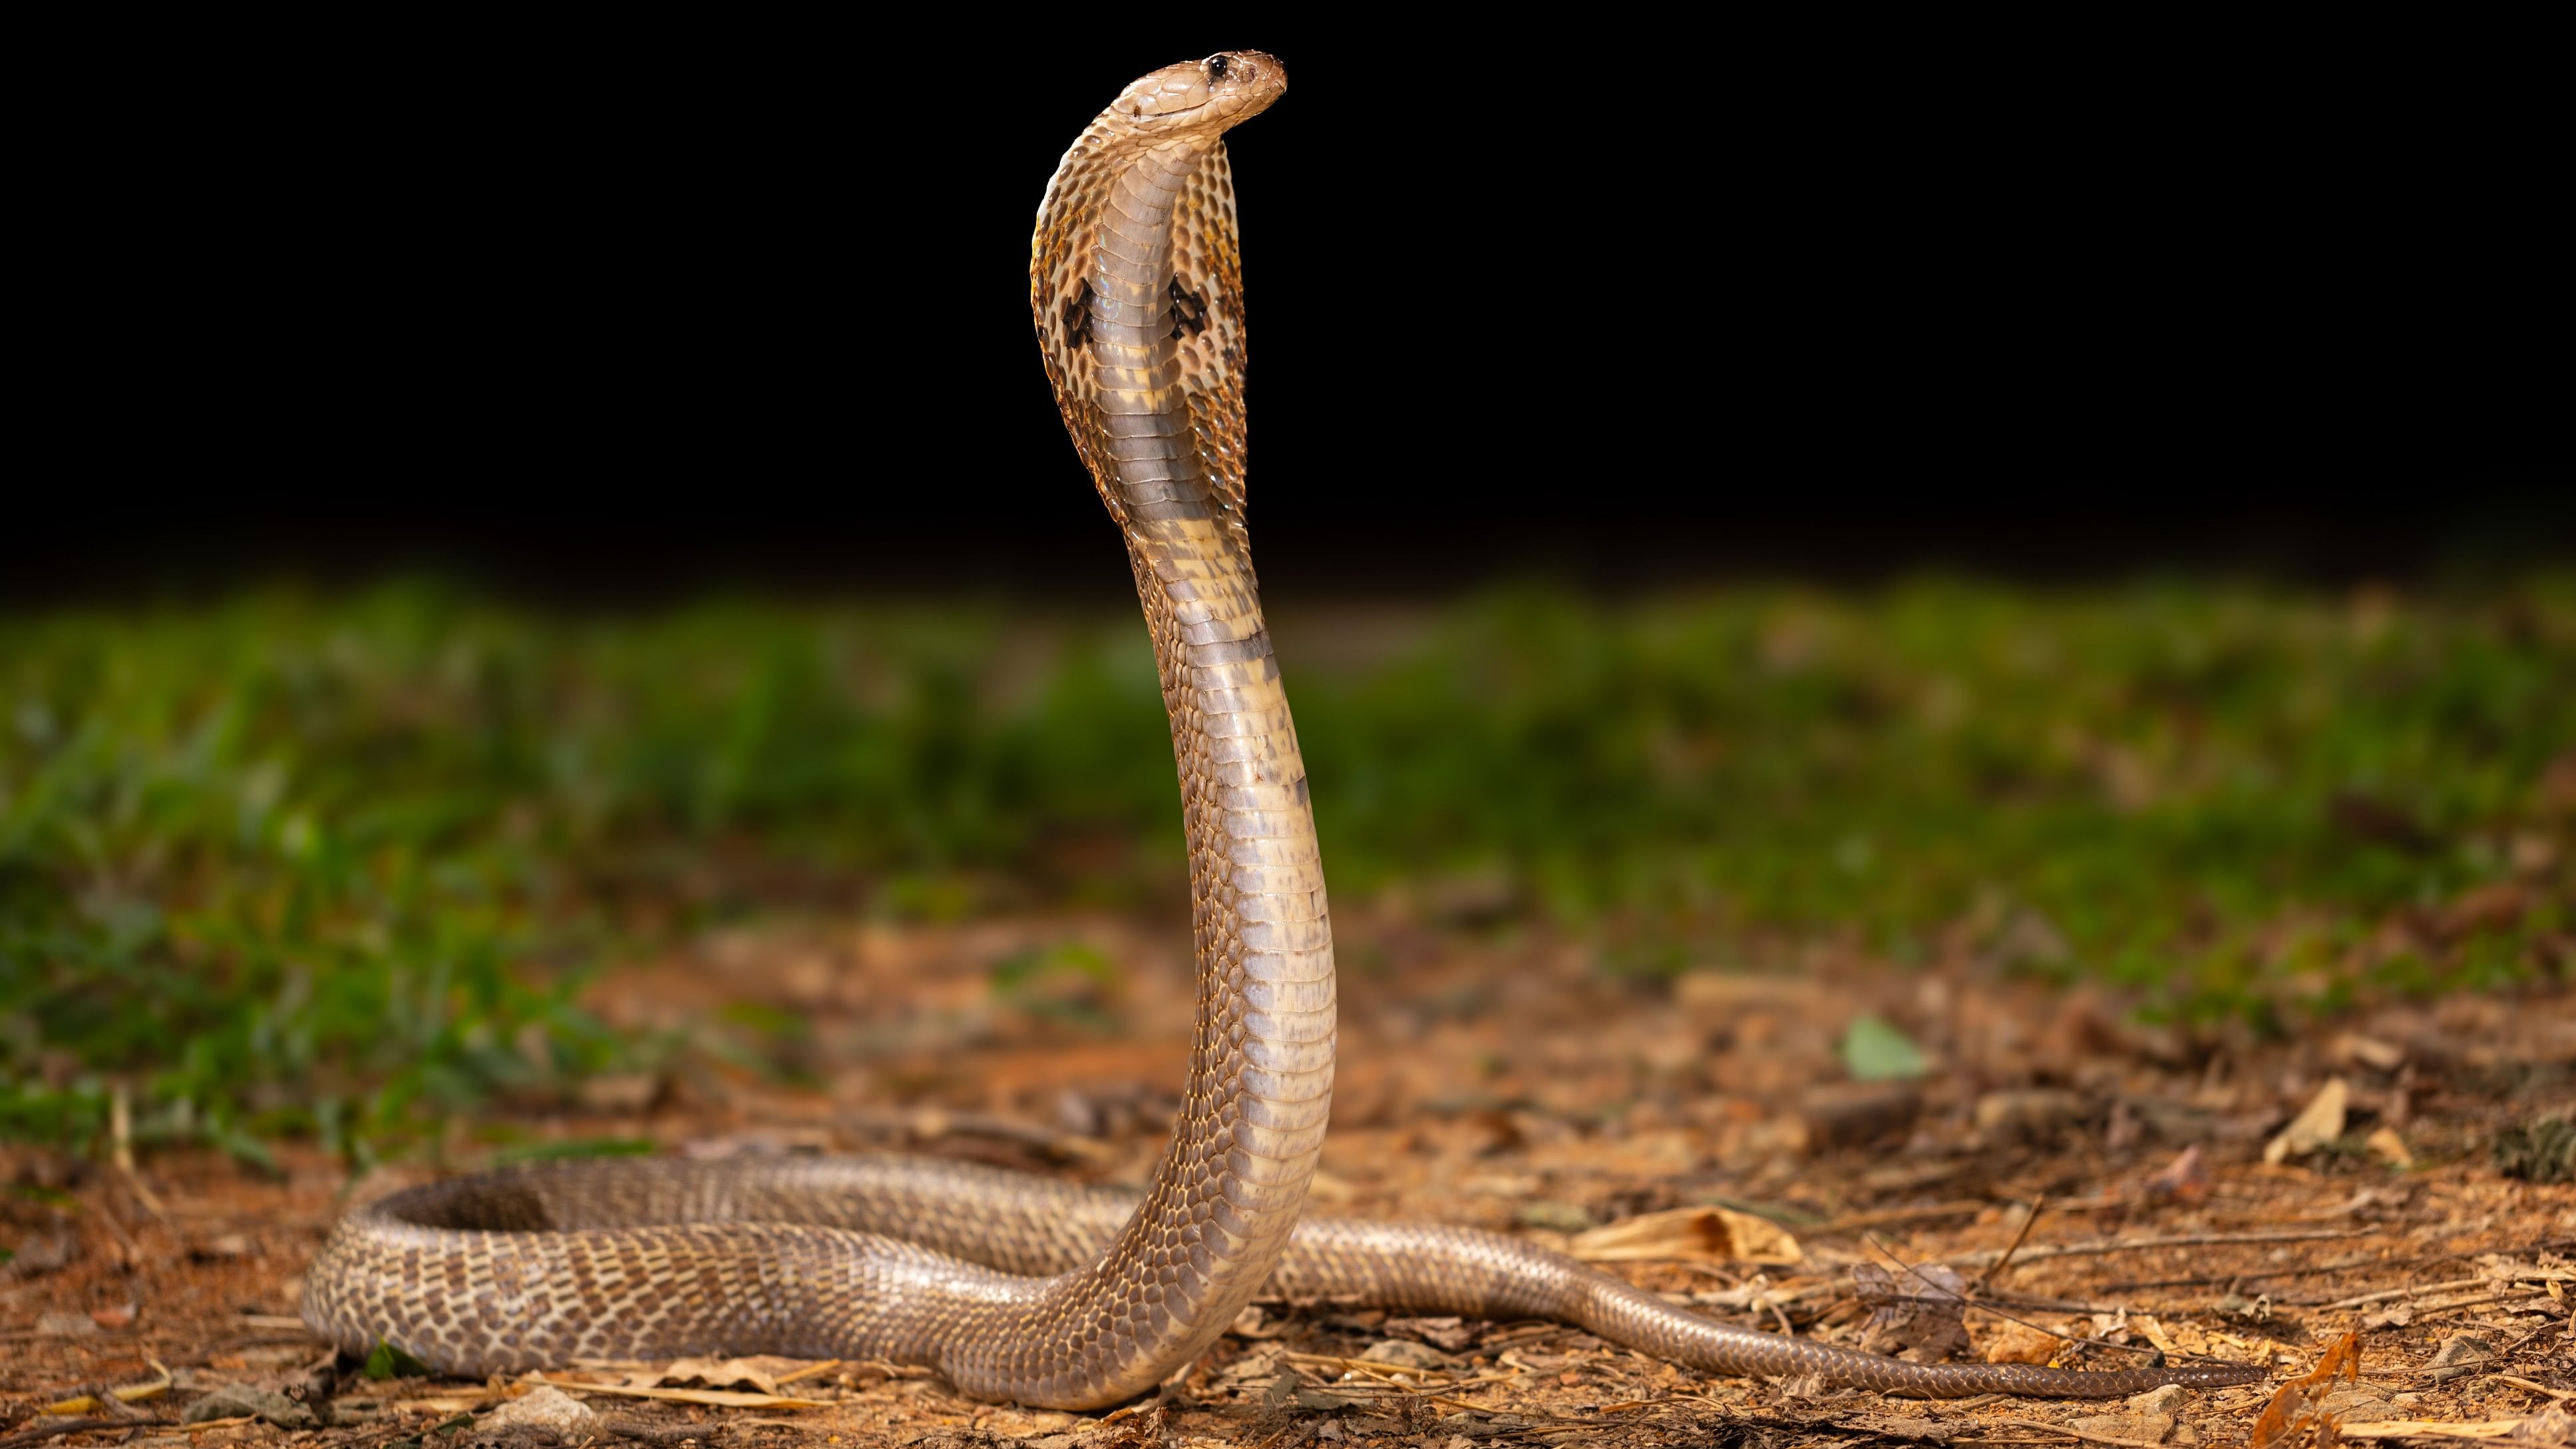 <div class="paragraphs"><p>An Indian spectacled cobra, a member of the Elapidae family of snakes, on the IISc campus</p></div>